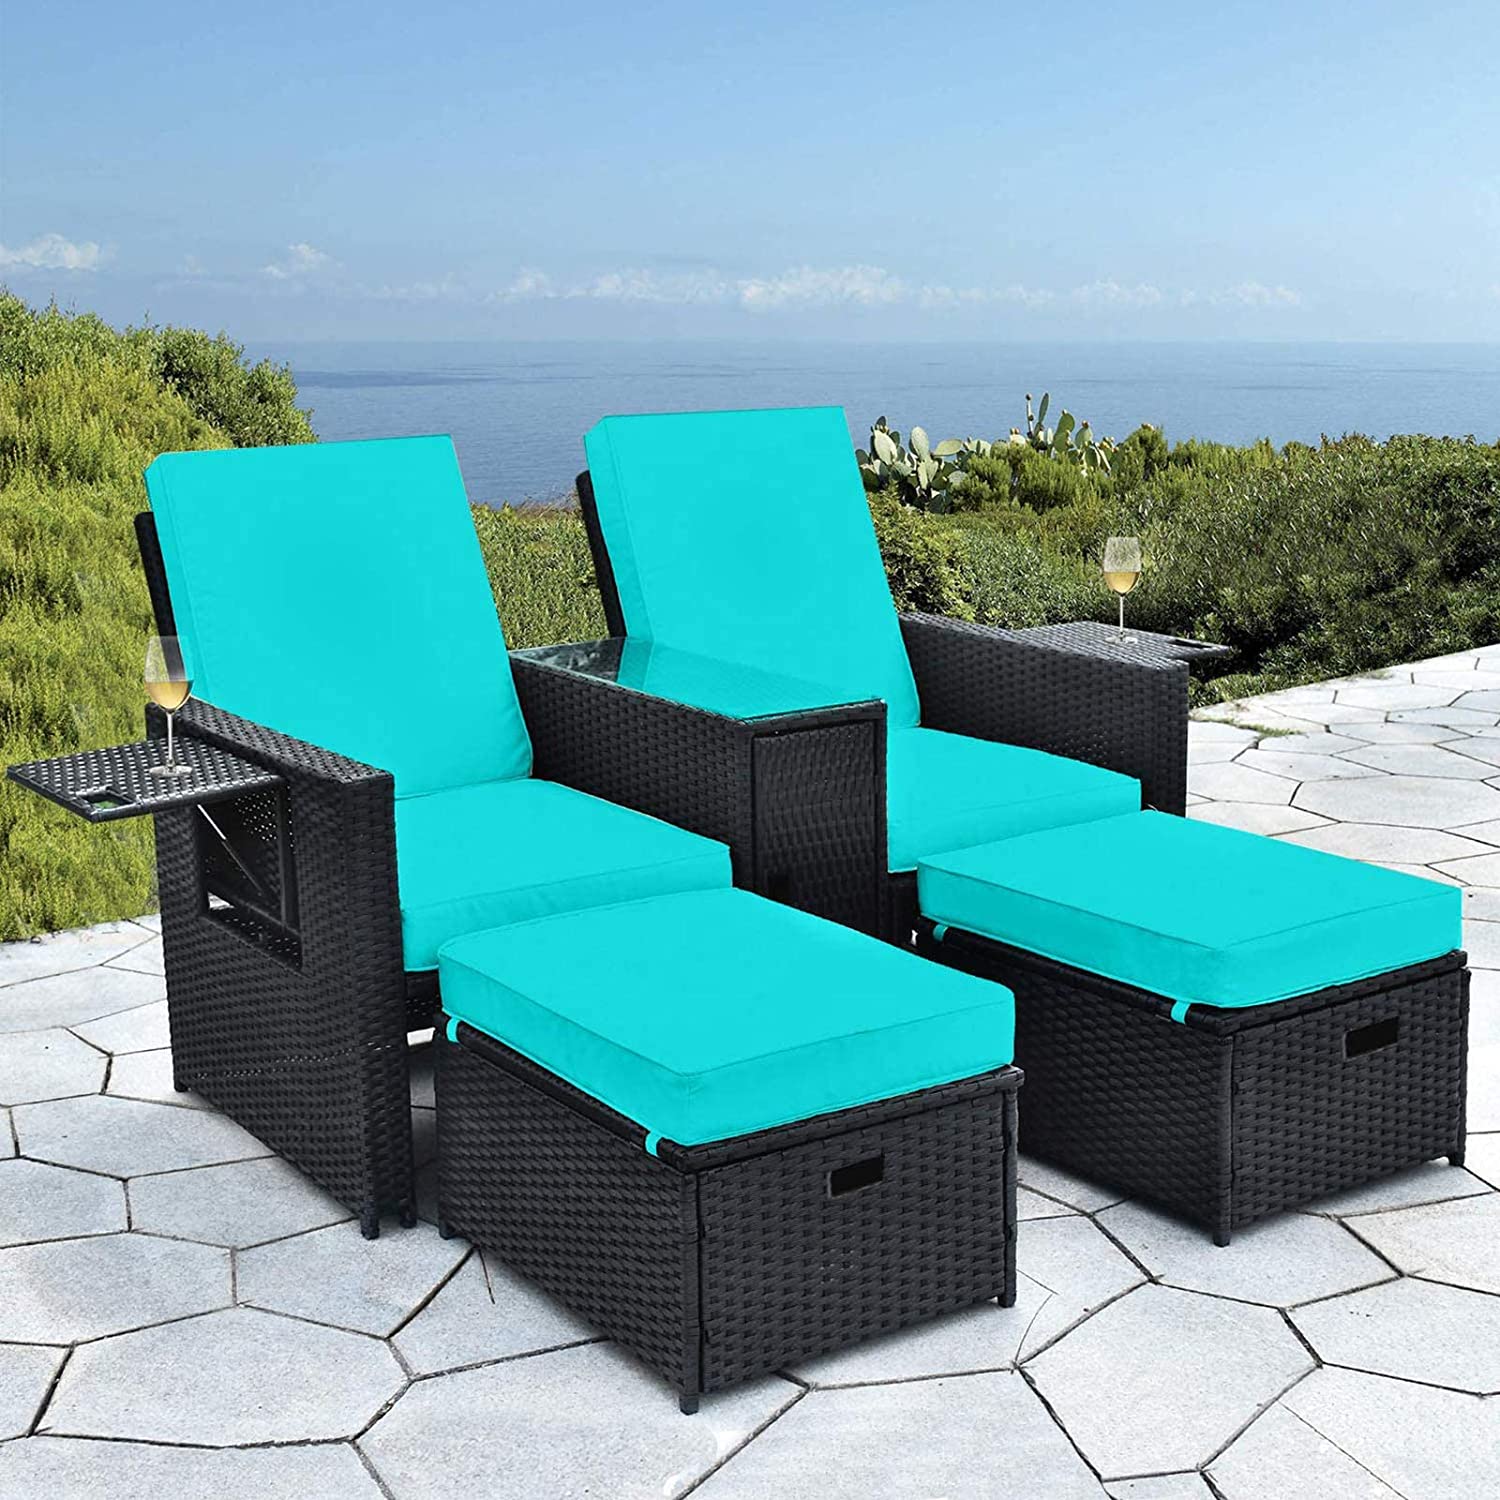 LVUYOYO 5pcs Patio Wicker Loveseat - Outdoor Rattan Sofa Set with Cushion - Adjustable Lounge Chair with Ottoman Footrest, Wicker Furniture for Garden, Patio, Balcony, Beach, Coffee Bar, Deck - image 1 of 8